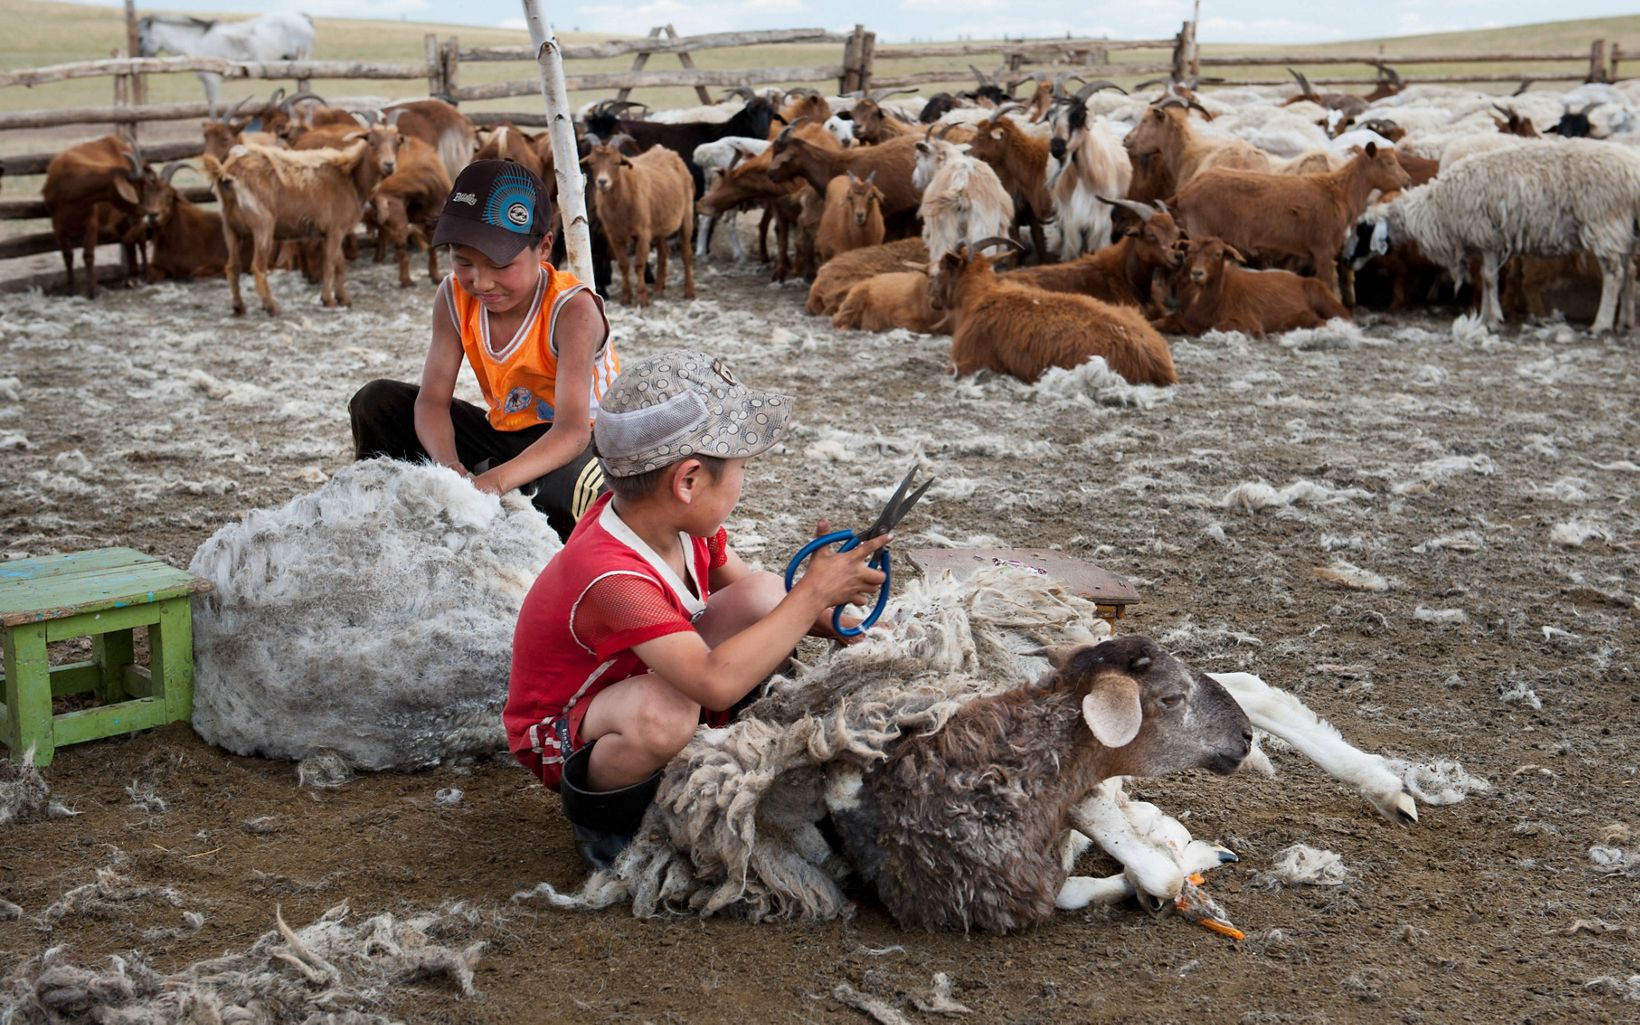 Two boys are clipping wool from sheep at their family farm in Mongolia.